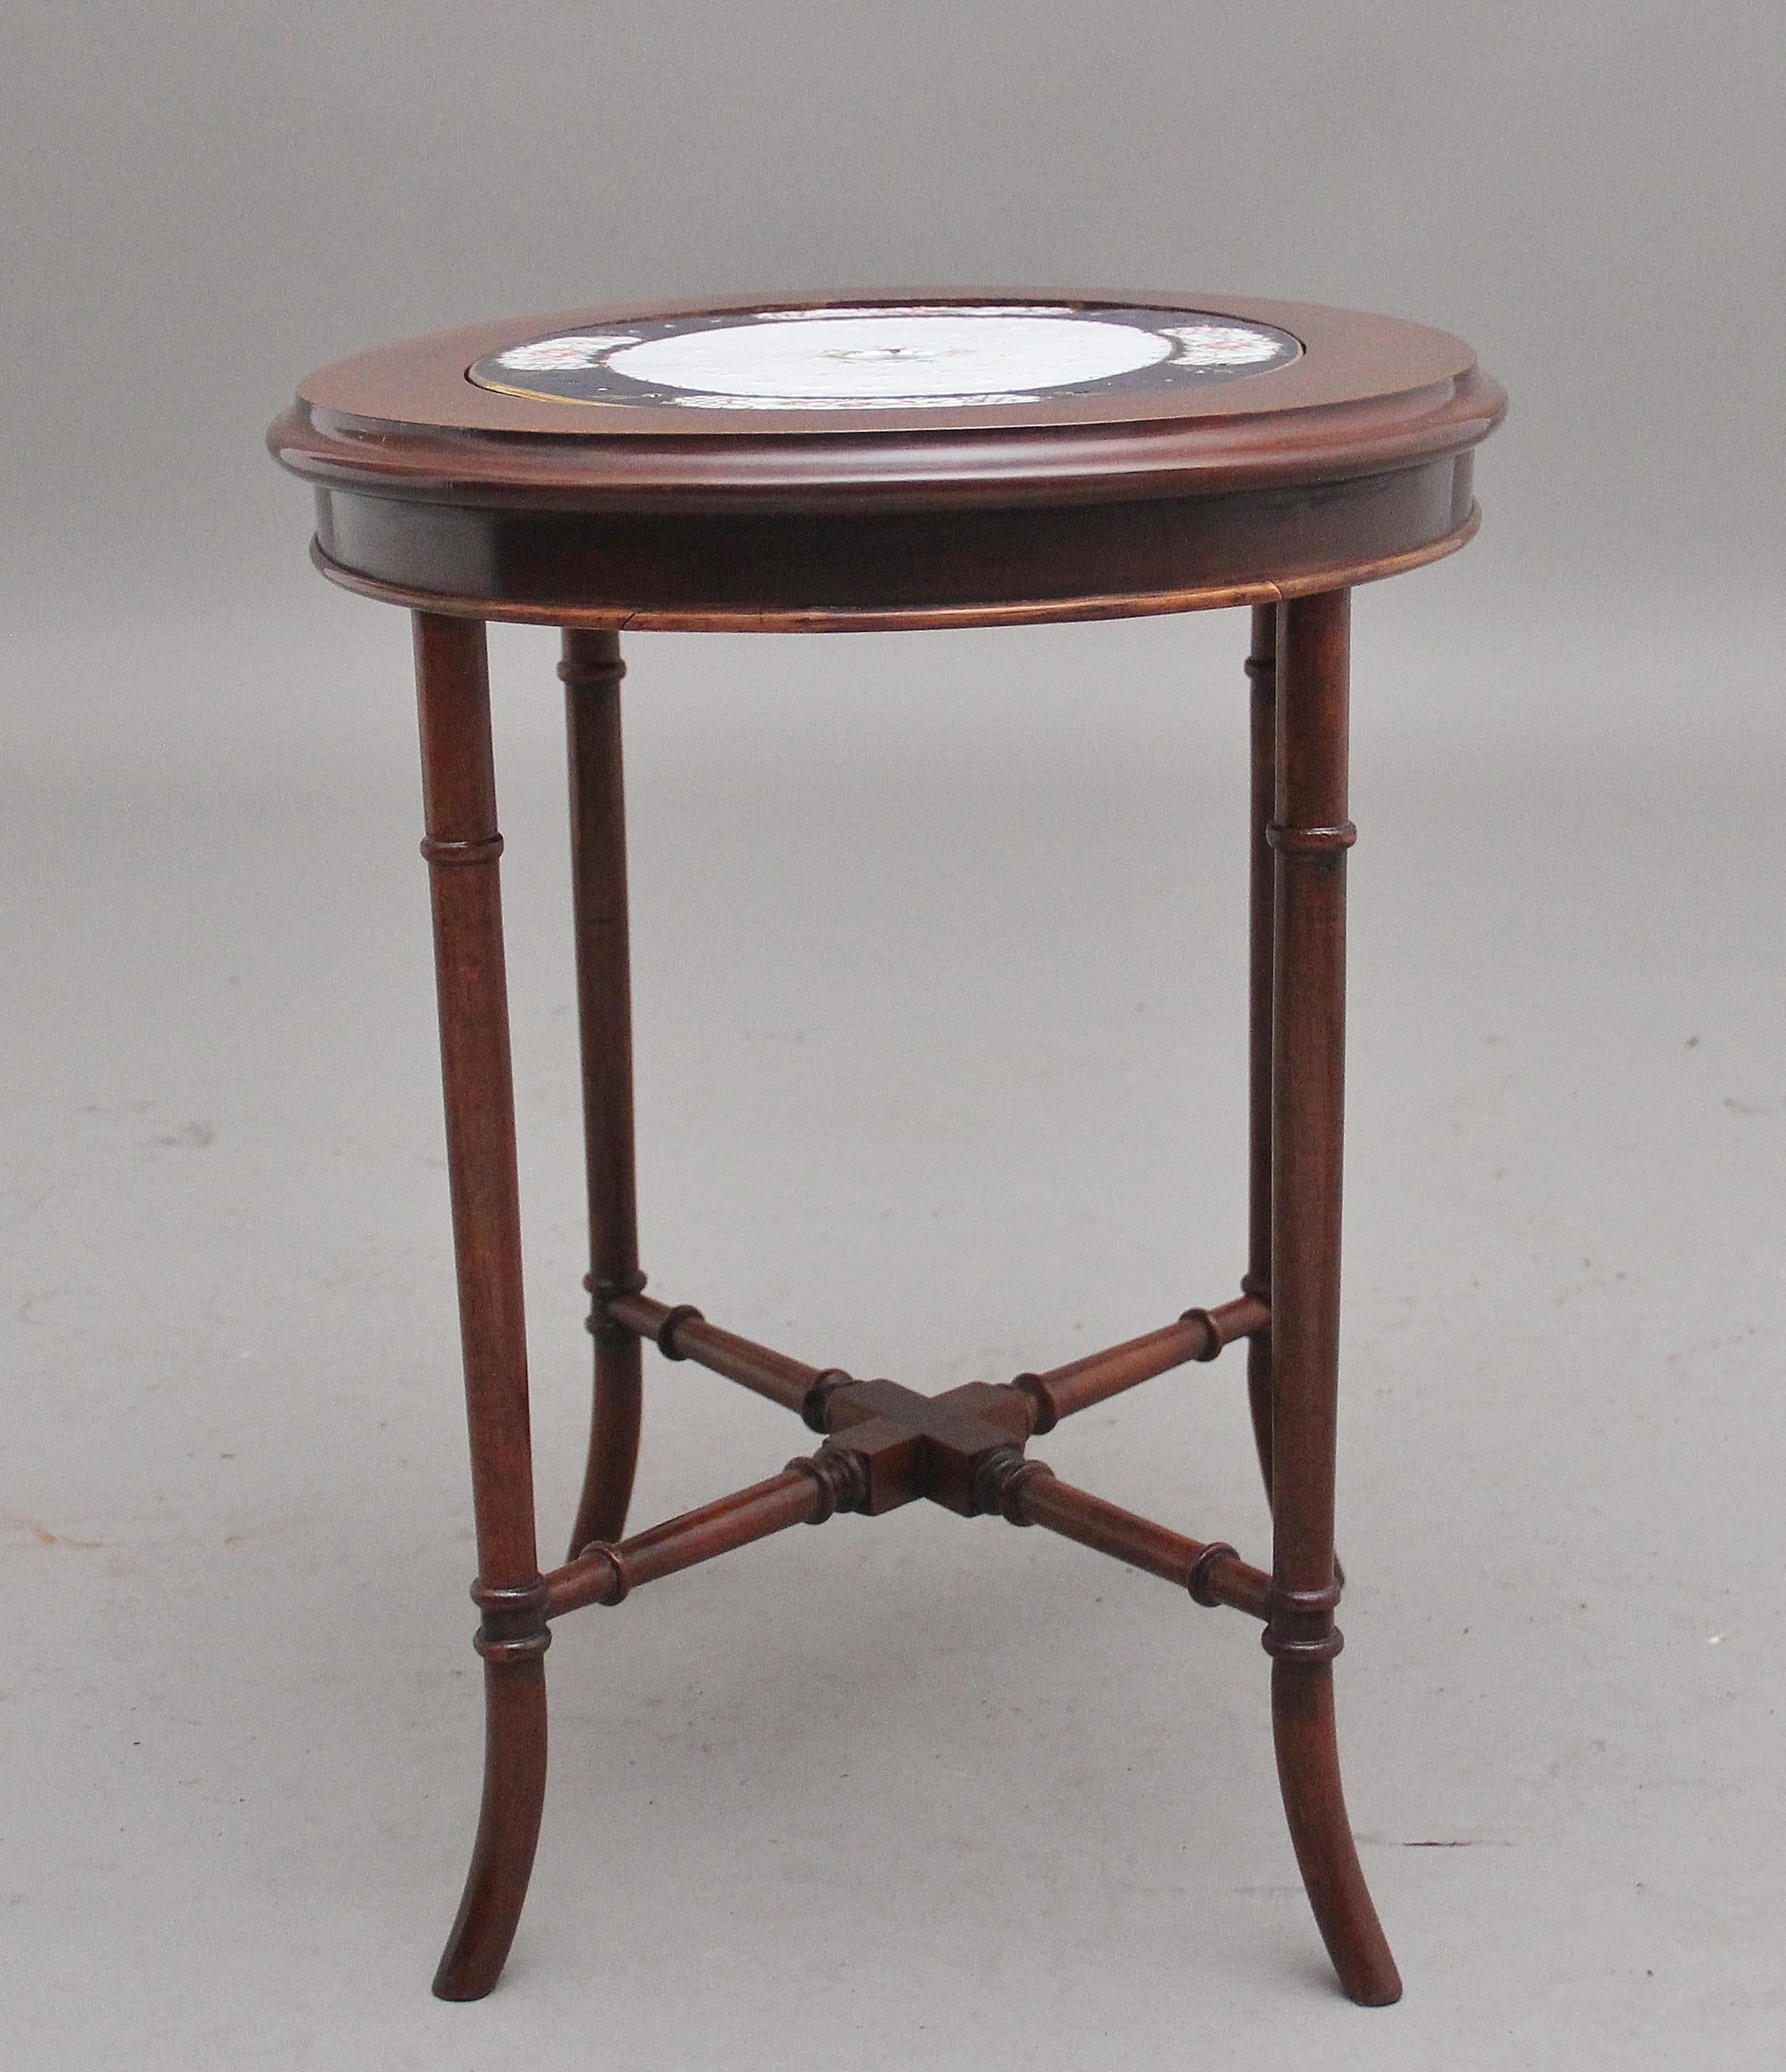 Early 20th century mahogany occasional table with a ceramic inset, having an oval moulded edge top with a decorative oval ceramic plate incorporating floral decoration and a navy blue border, supported on turned outswept legs united by a cross